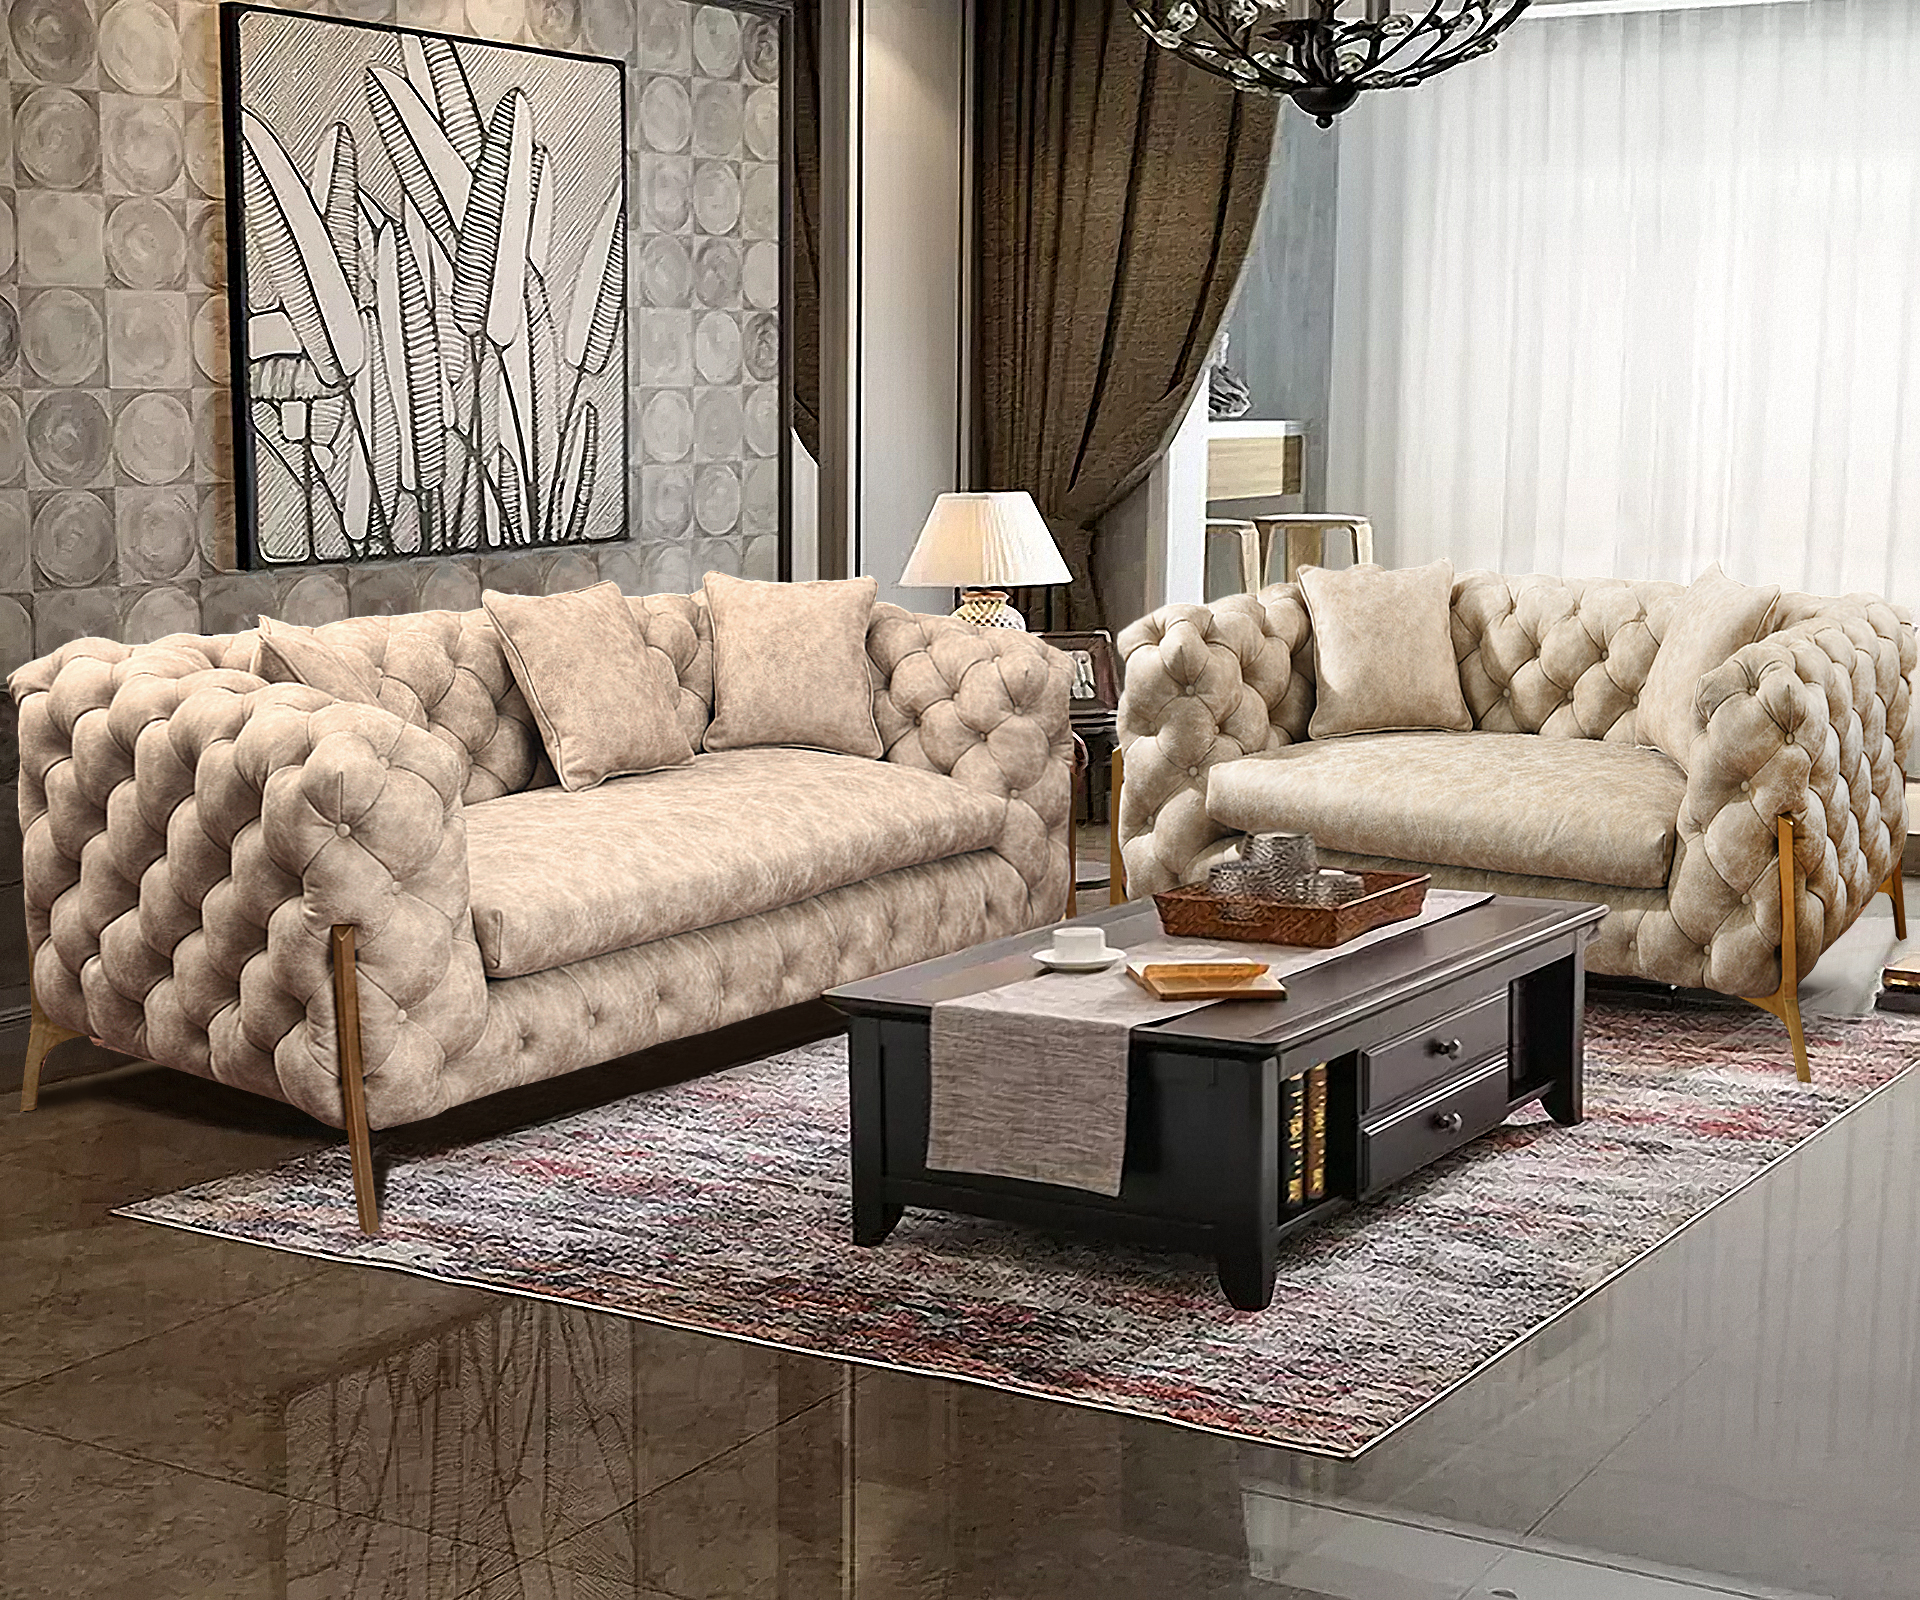 US East spot delivery warehouse including delivery fee cheap luxury yellow 5 seat living room sofa furniture set